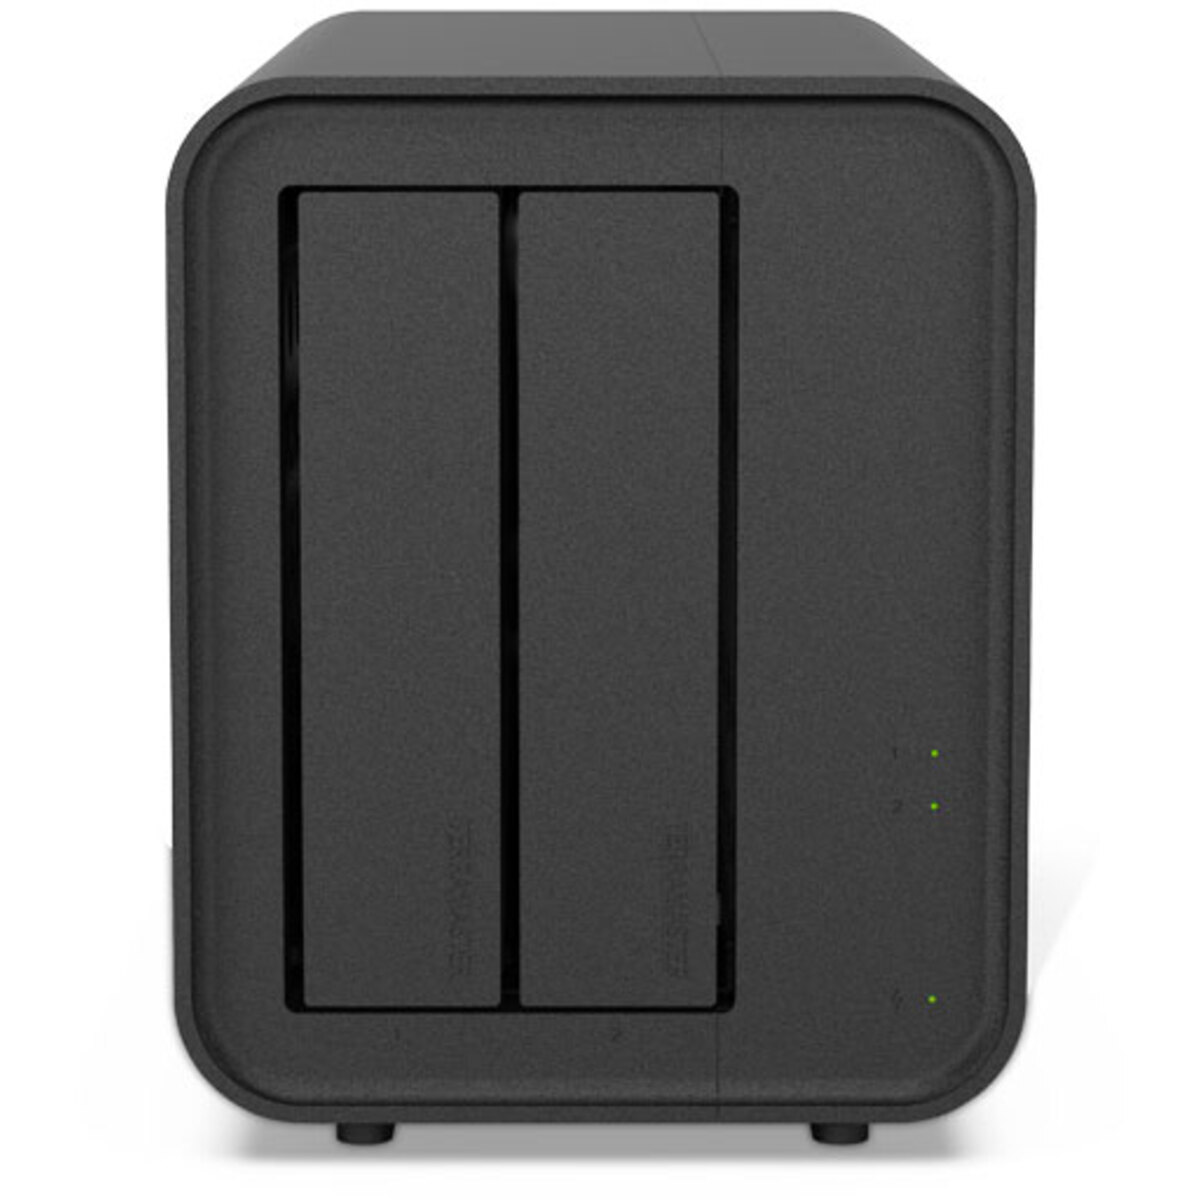 TerraMaster F2-424 8tb 2-Bay Desktop Multimedia / Power User / Business NAS - Network Attached Storage Device 2x4tb Western Digital Blue WD40EZRZ 3.5 5400rpm SATA 6Gb/s HDD CONSUMER Class Drives Installed - Burn-In Tested - ON SALE F2-424